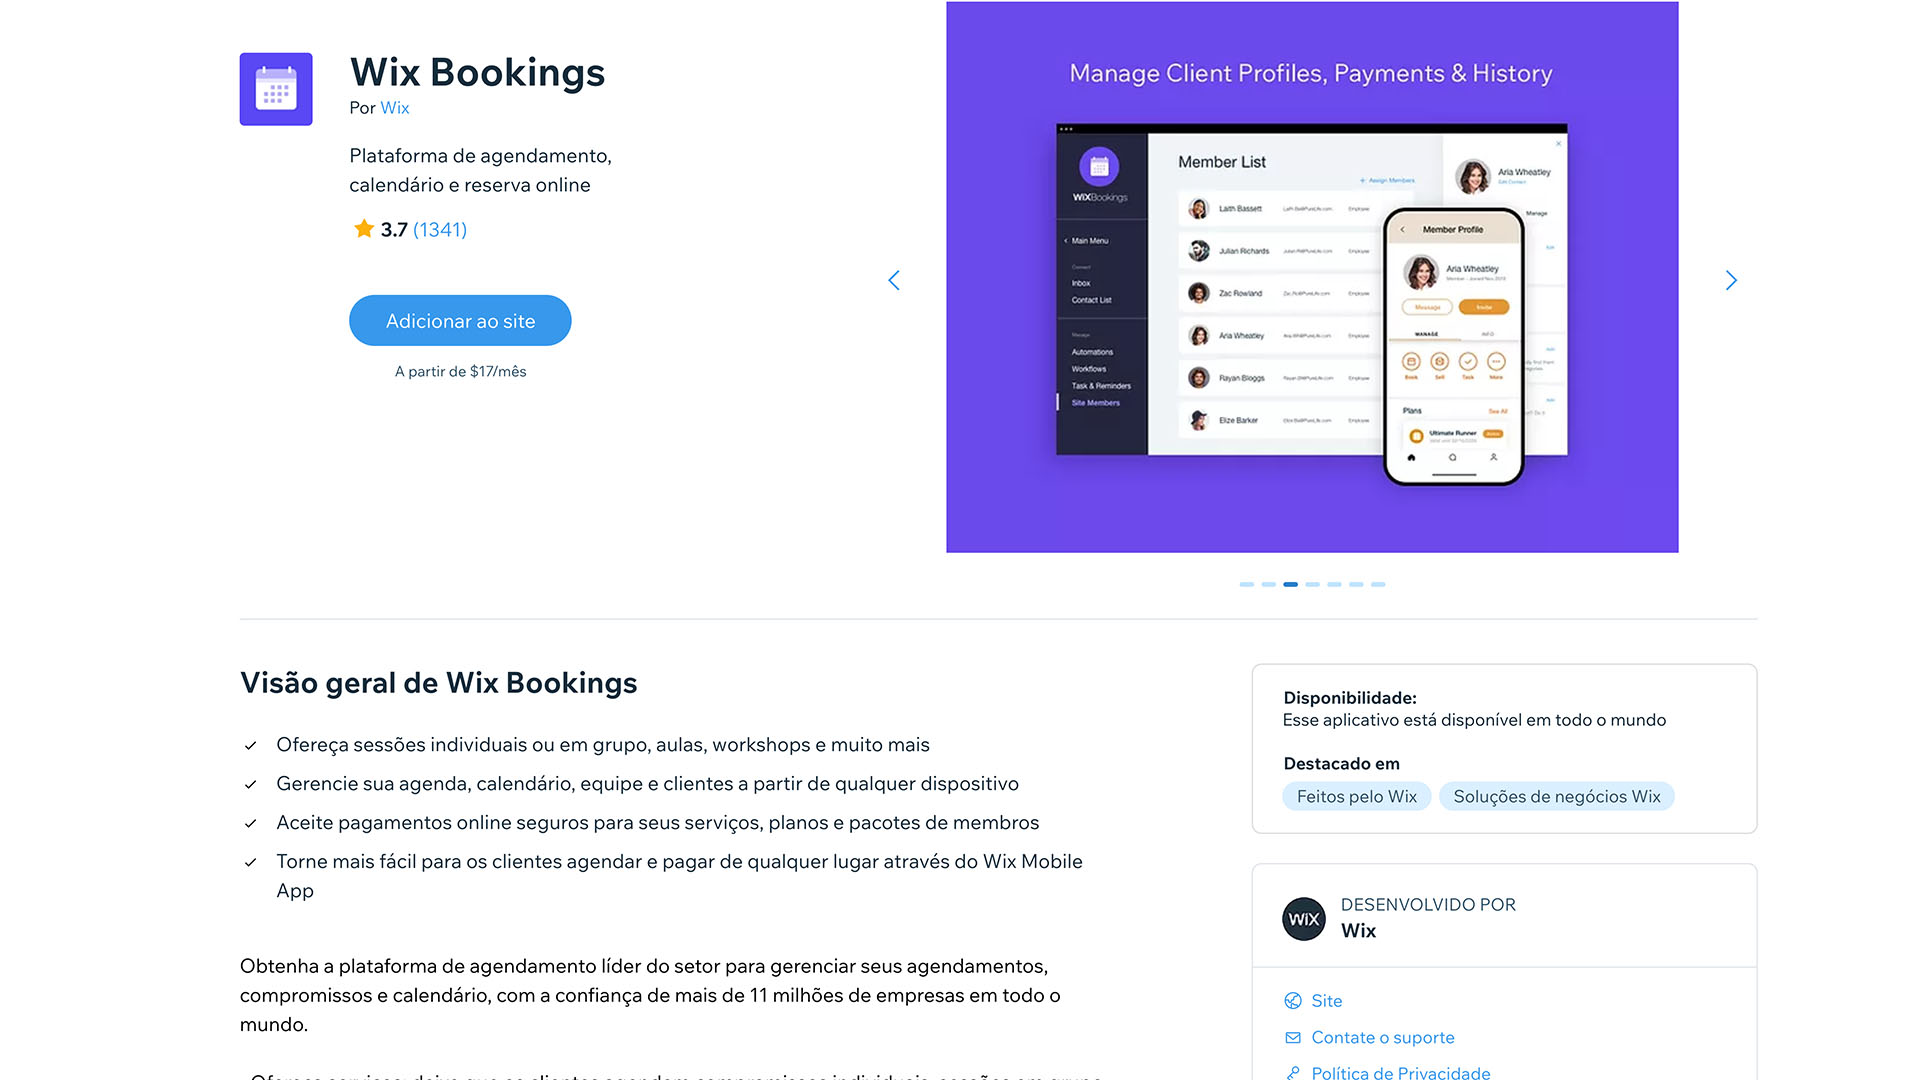 Wix Bookings